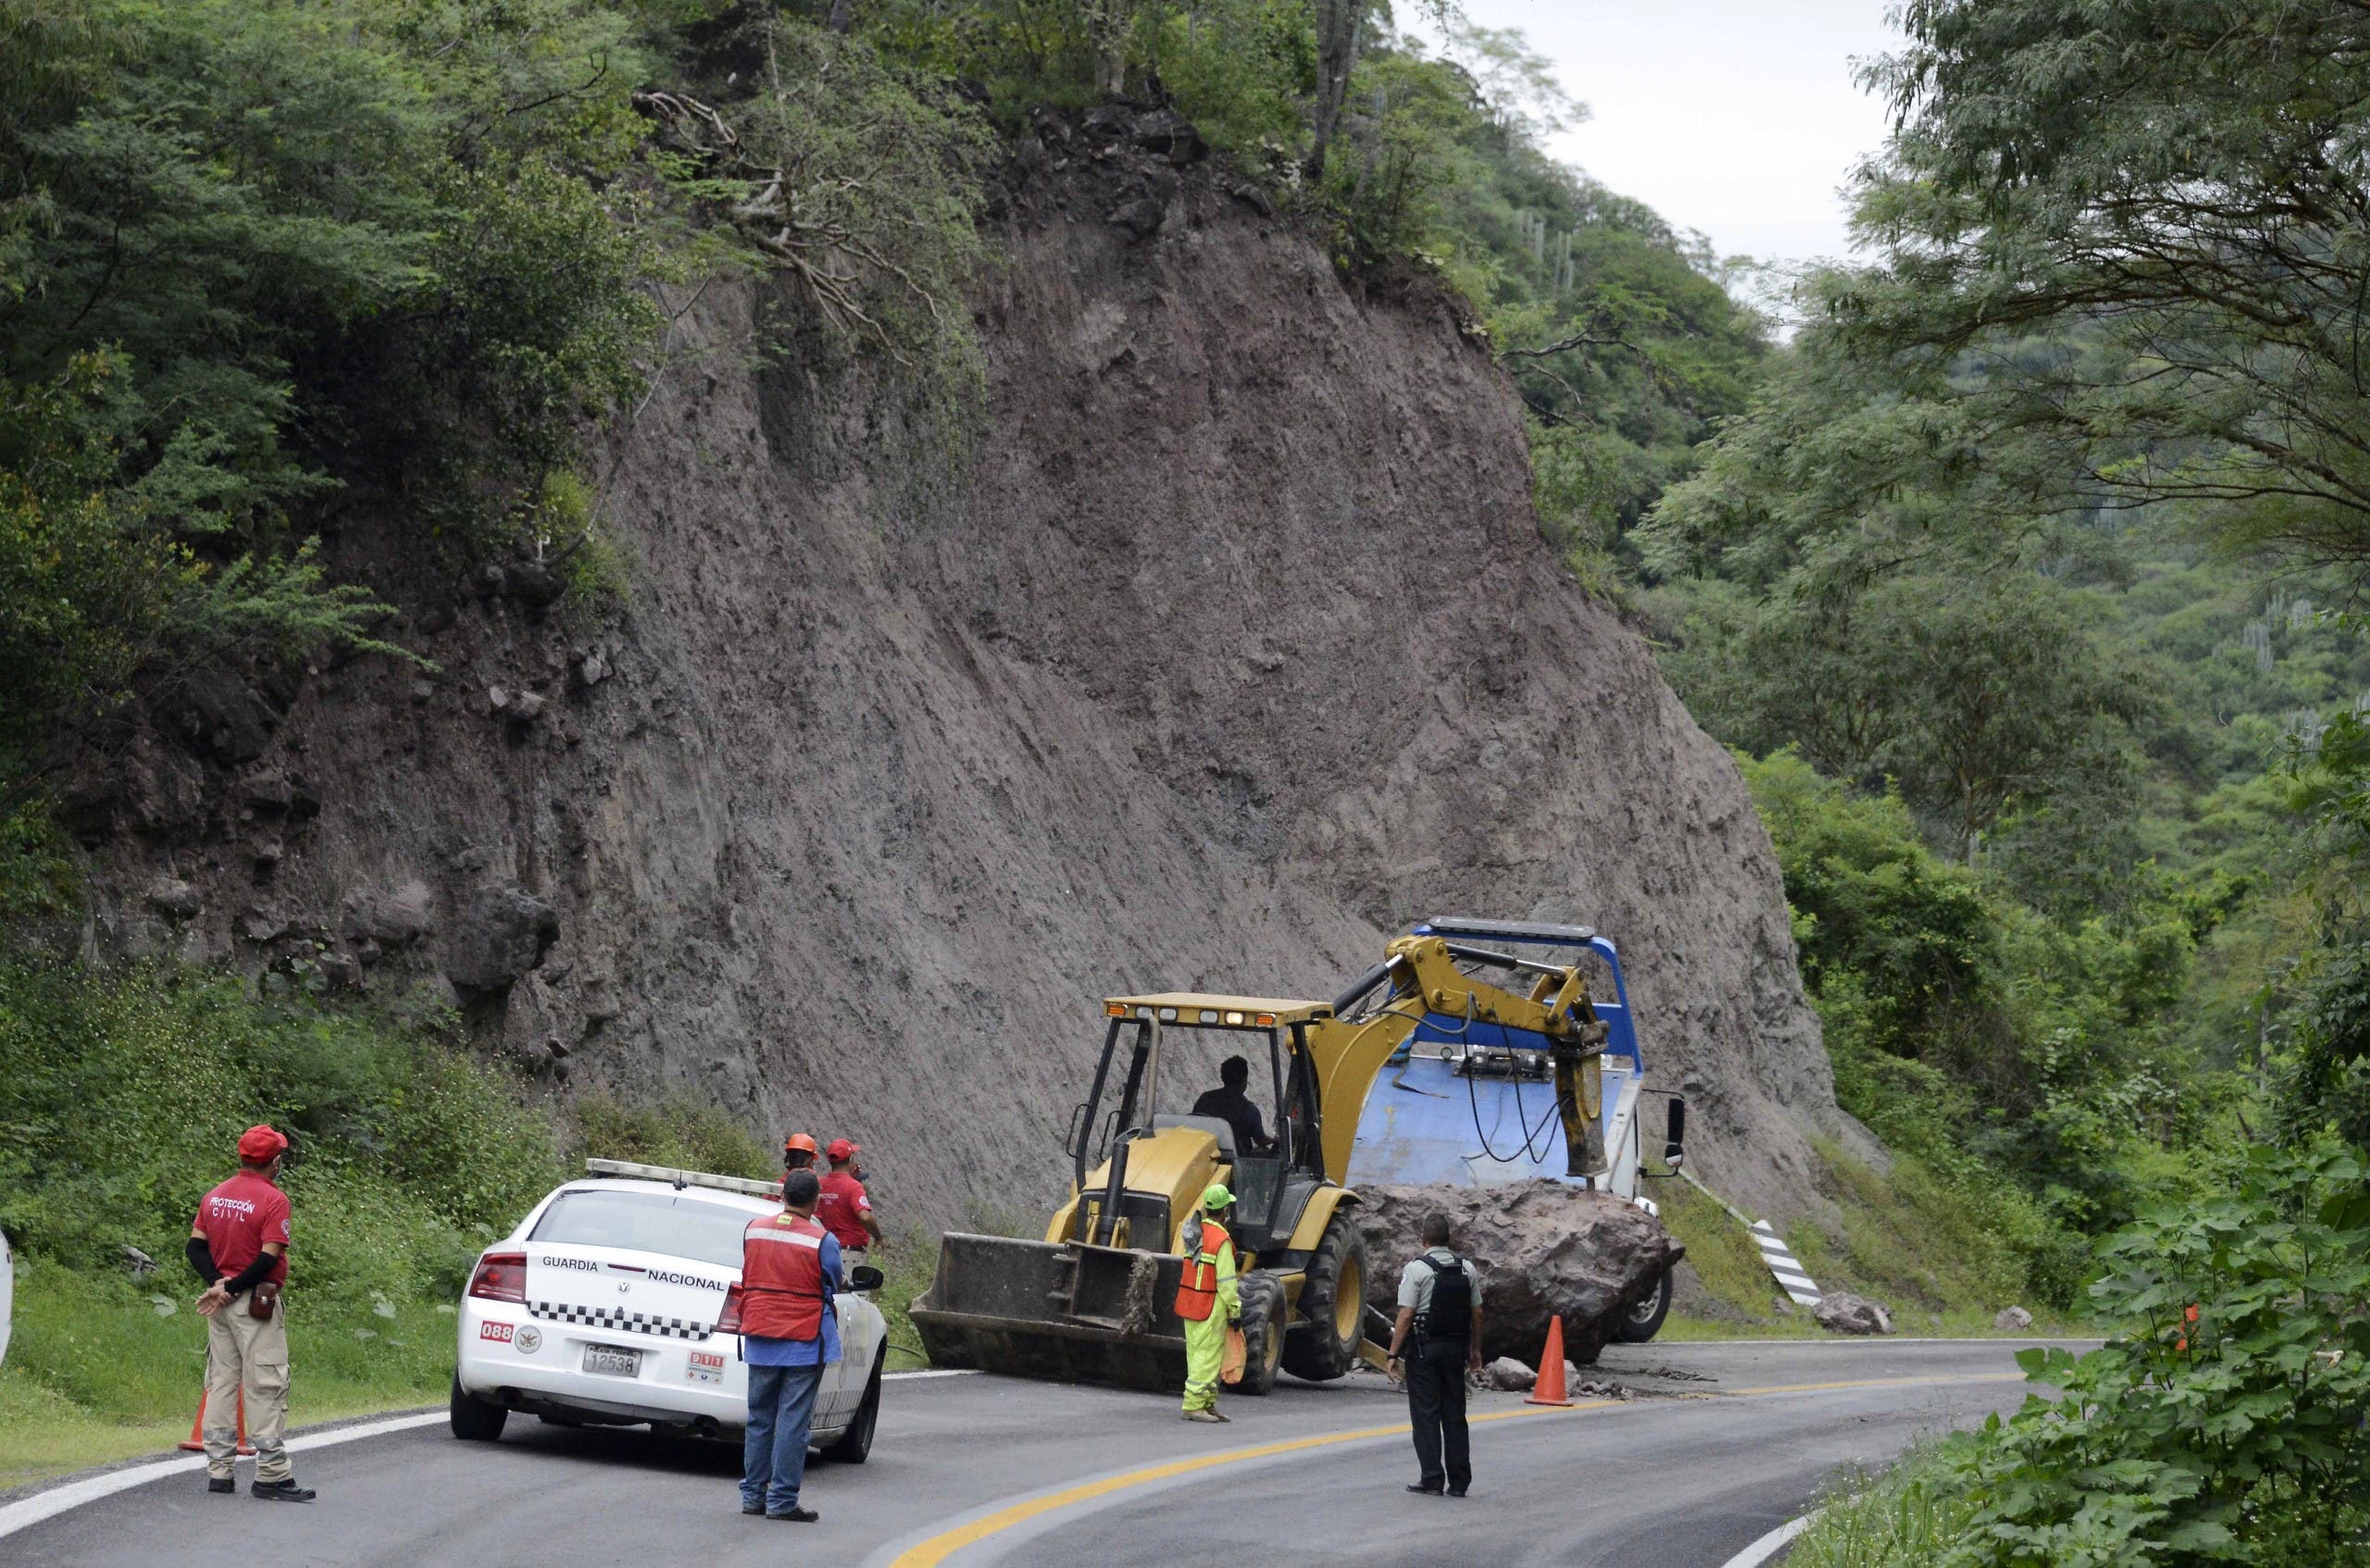 Workers remove rocks on the Acapulco-Iguala highway after a quake in Acapulco, Guerrero state, Mexico on September 8, 2021. (AFP)